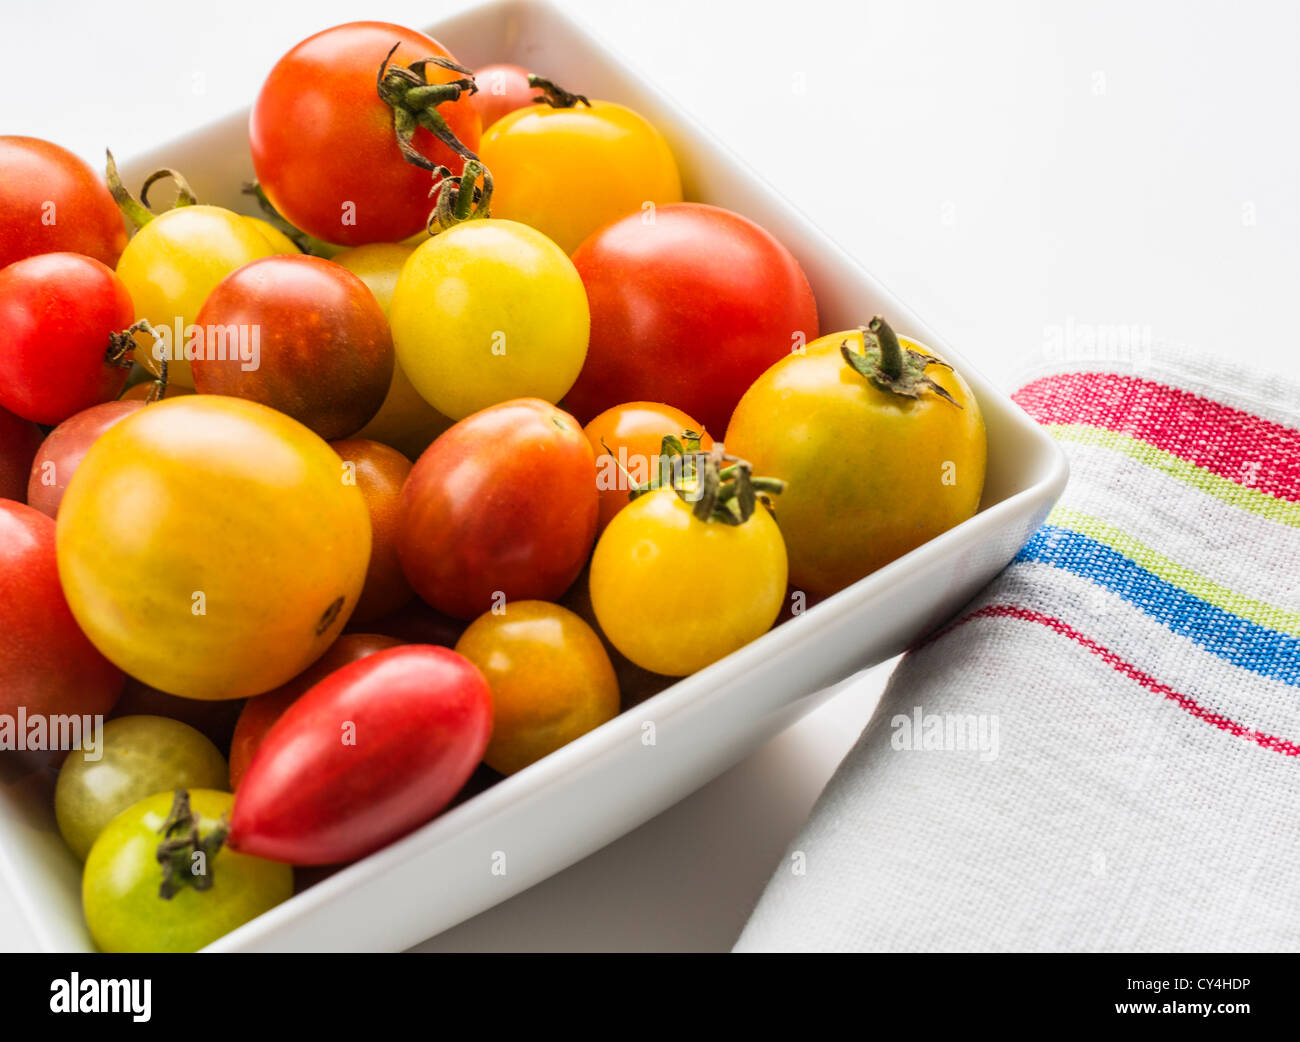 USA, New Jersey, Jersey City, Heirloom tomatoes in, studio shot Banque D'Images